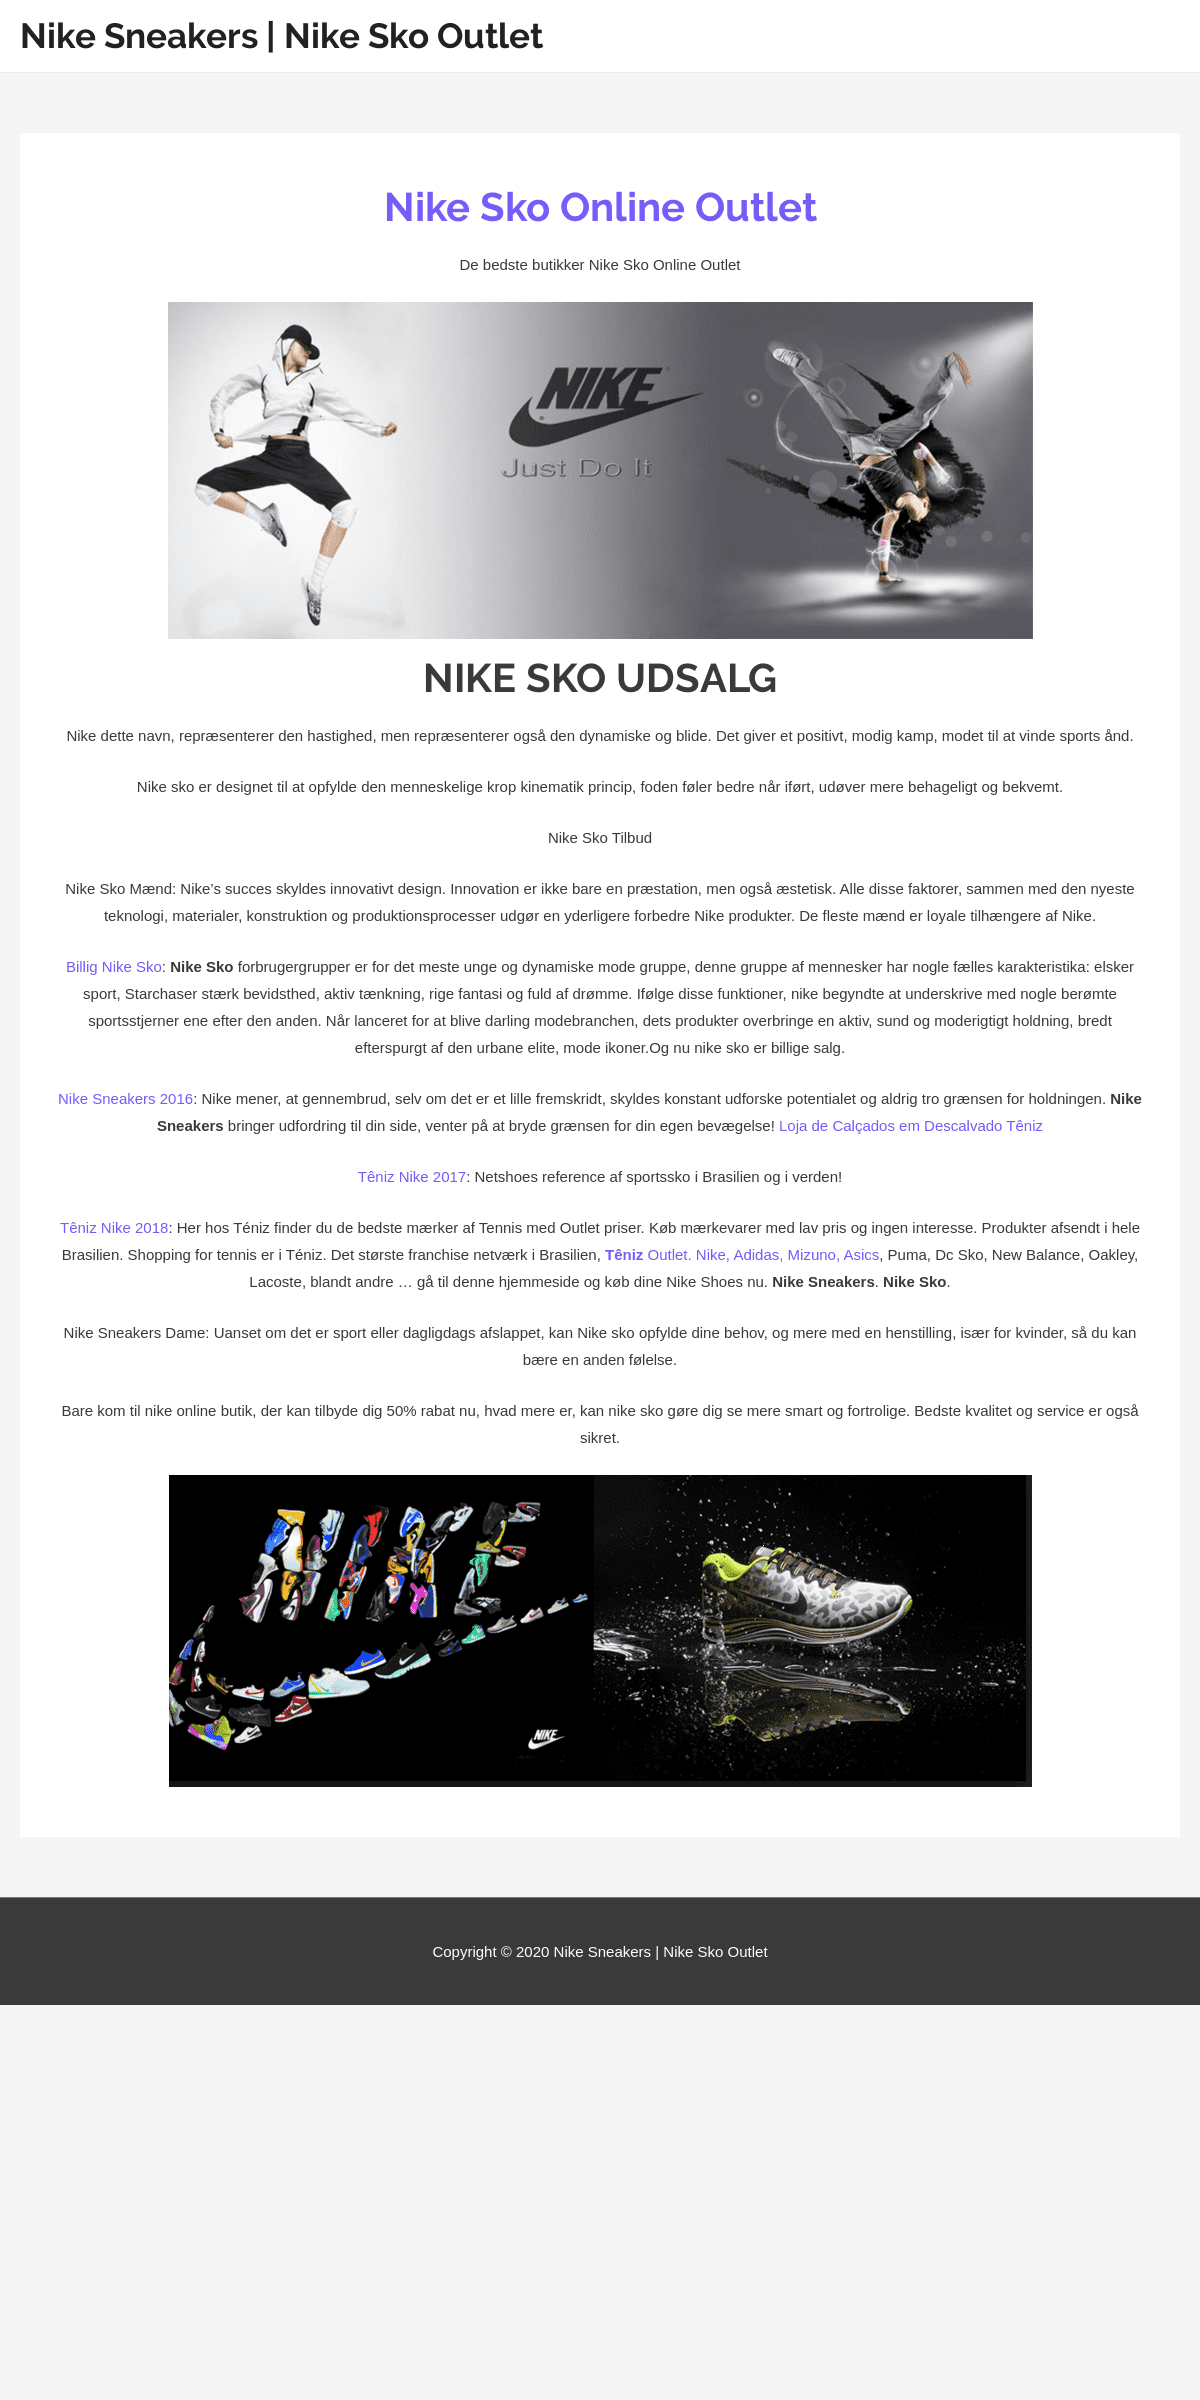 A complete backup of nikesneakers.dk